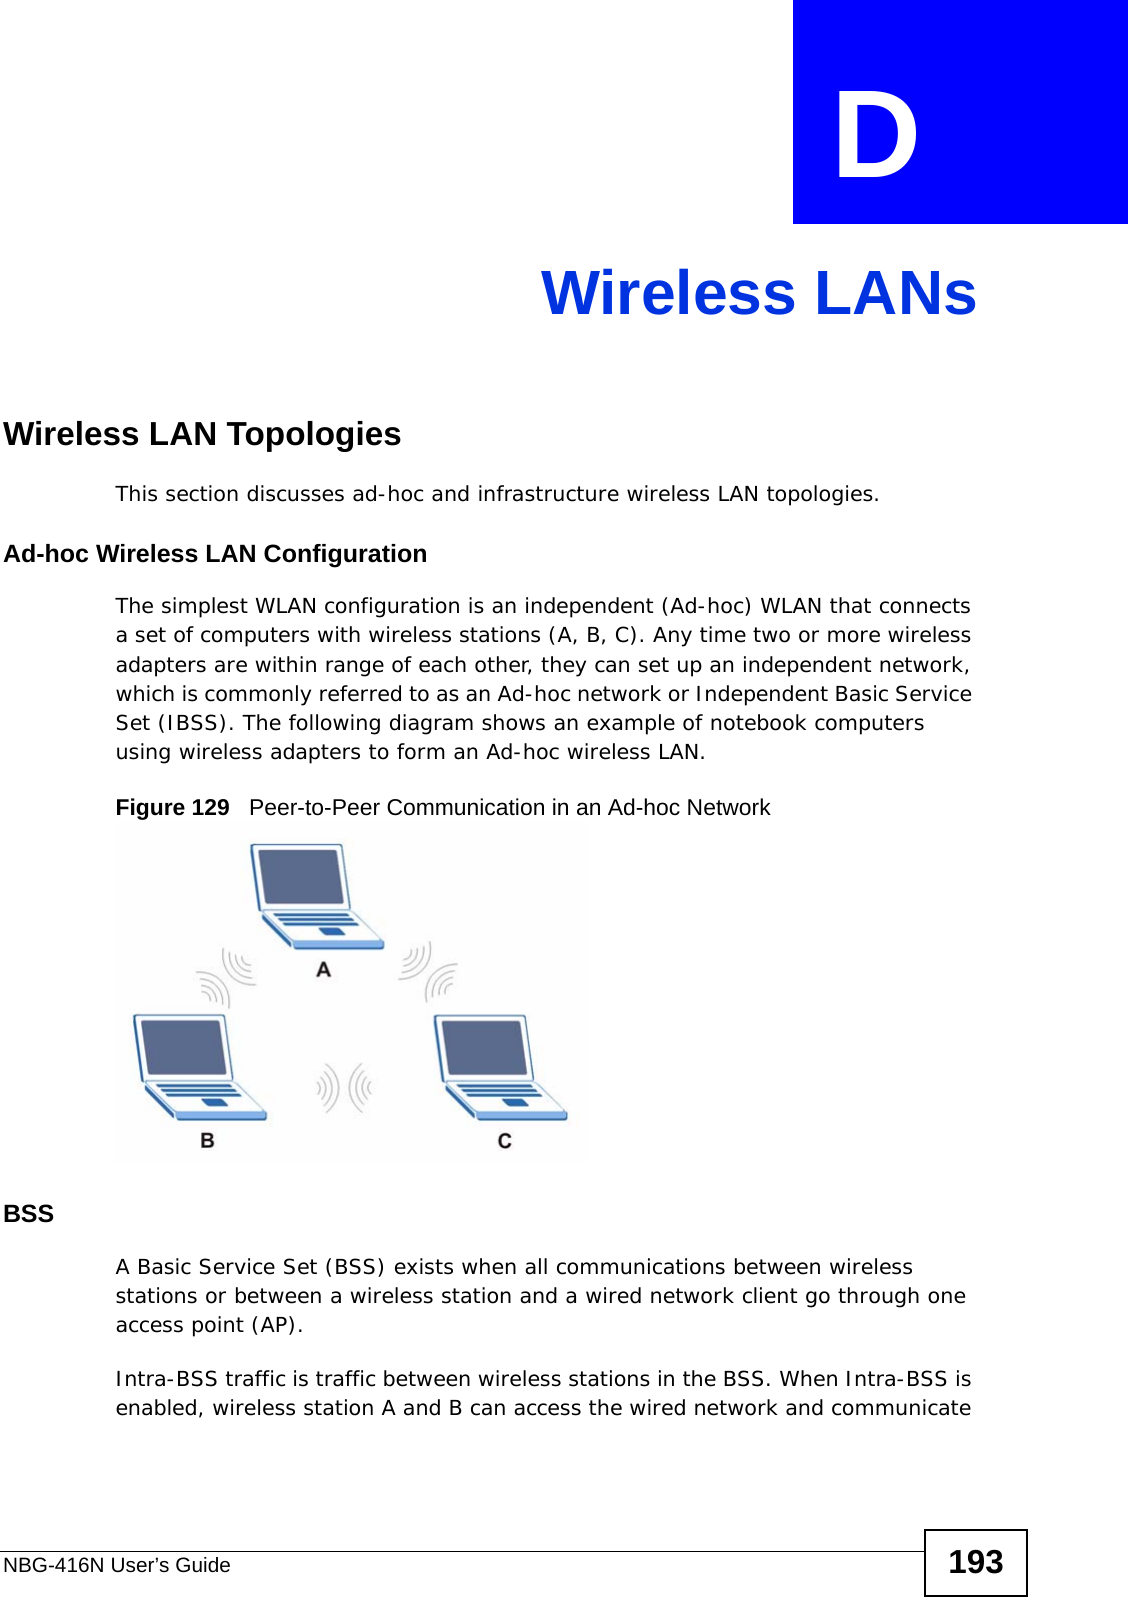 NBG-416N User’s Guide 193APPENDIX  D Wireless LANsWireless LAN TopologiesThis section discusses ad-hoc and infrastructure wireless LAN topologies.Ad-hoc Wireless LAN ConfigurationThe simplest WLAN configuration is an independent (Ad-hoc) WLAN that connects a set of computers with wireless stations (A, B, C). Any time two or more wireless adapters are within range of each other, they can set up an independent network, which is commonly referred to as an Ad-hoc network or Independent Basic Service Set (IBSS). The following diagram shows an example of notebook computers using wireless adapters to form an Ad-hoc wireless LAN. Figure 129   Peer-to-Peer Communication in an Ad-hoc NetworkBSSA Basic Service Set (BSS) exists when all communications between wireless stations or between a wireless station and a wired network client go through one access point (AP). Intra-BSS traffic is traffic between wireless stations in the BSS. When Intra-BSS is enabled, wireless station A and B can access the wired network and communicate 